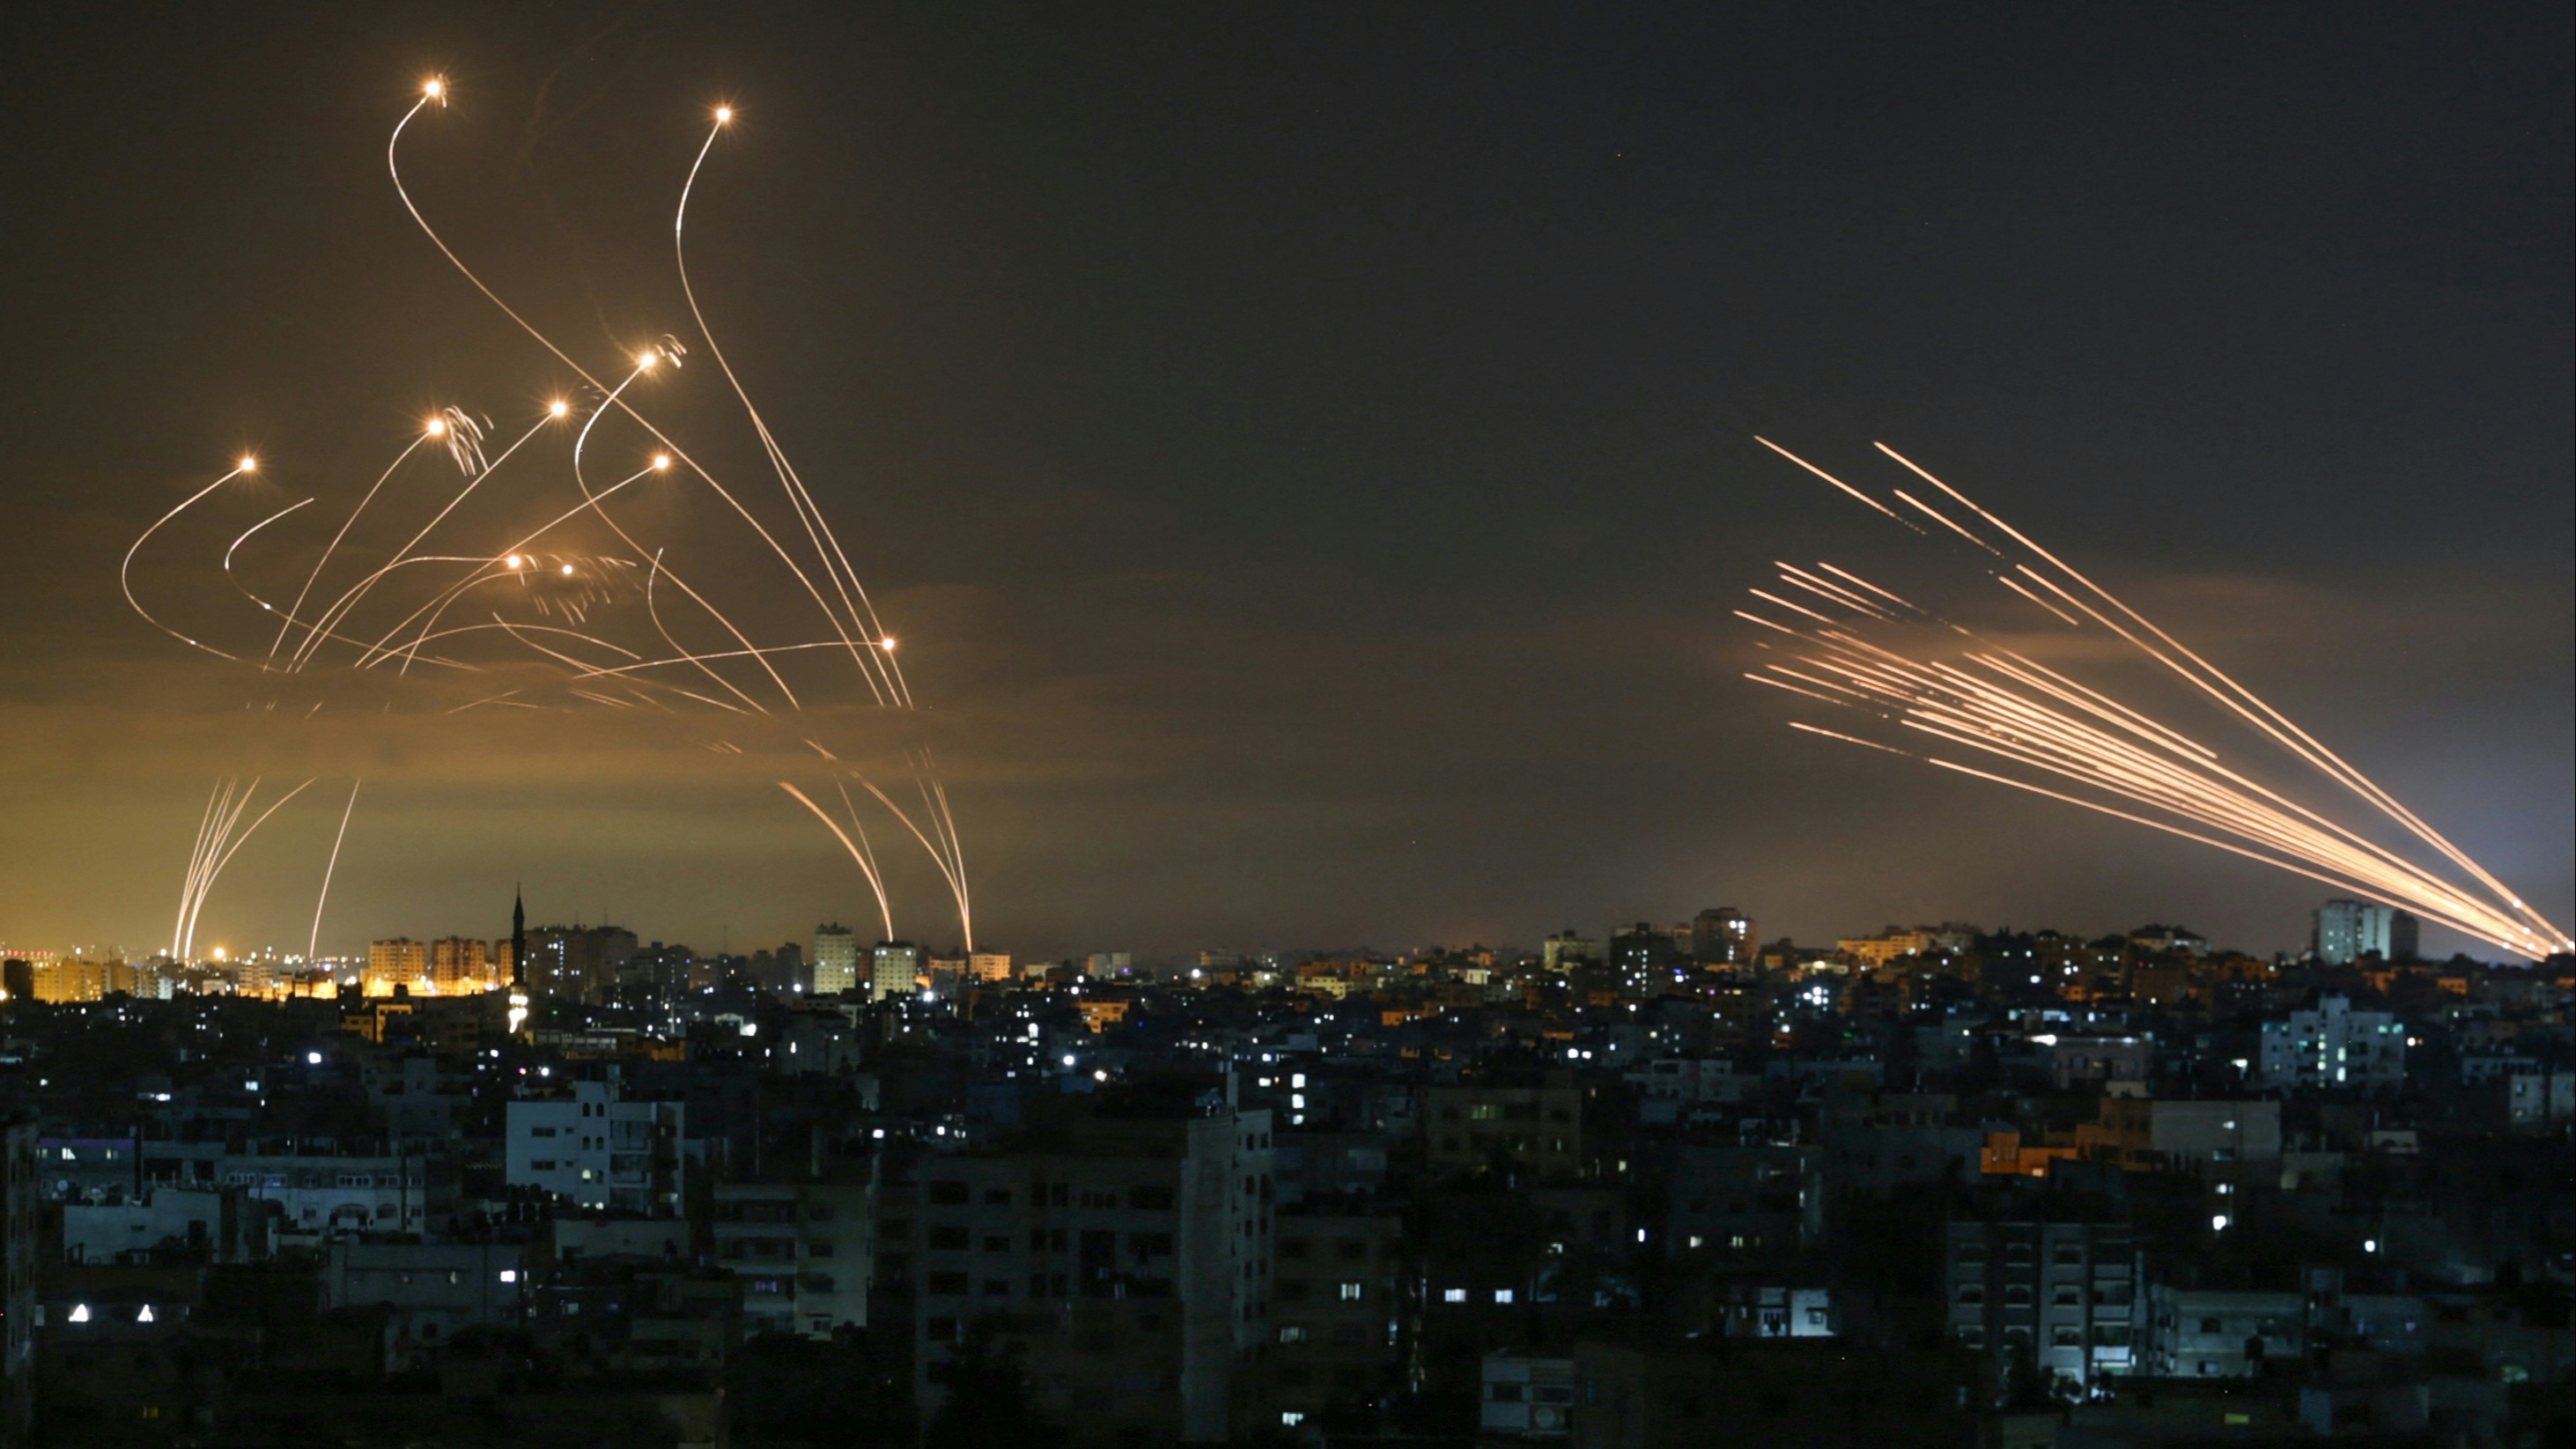 The Israeli Iron Dome missile defence system (L) intercepts rockets (R) fired by the Hamas movement towards southern Israel from Beit Lahia in the northern Gaza Strip as seen in the sky above the Gaza Strip overnight on May 14, 2021.